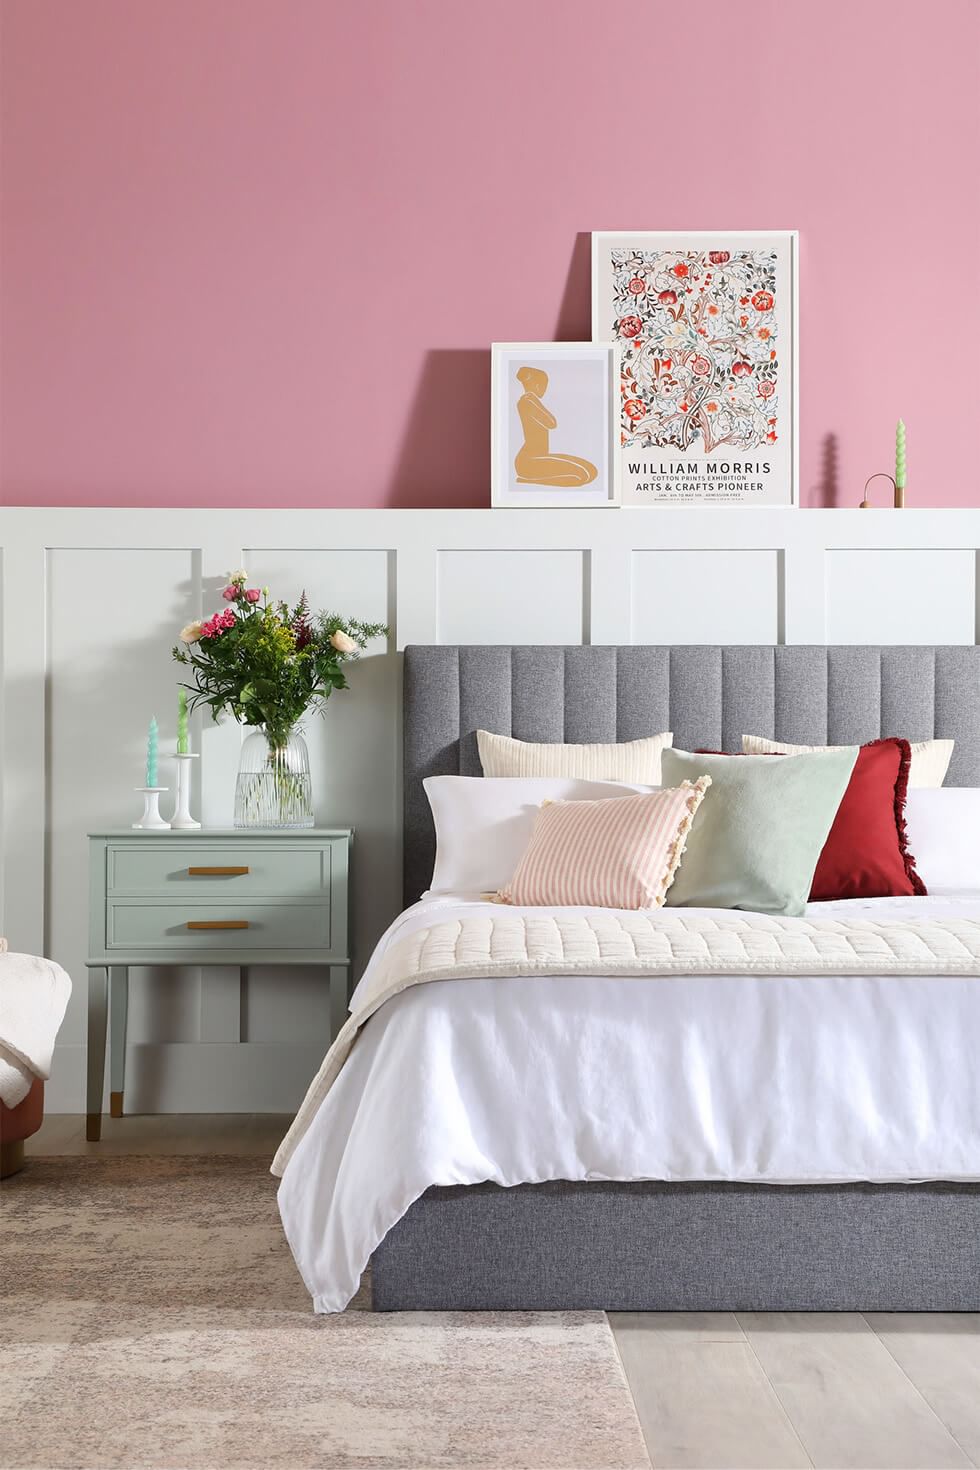 Stylish bedroom with a soft pink wall and cosy bed